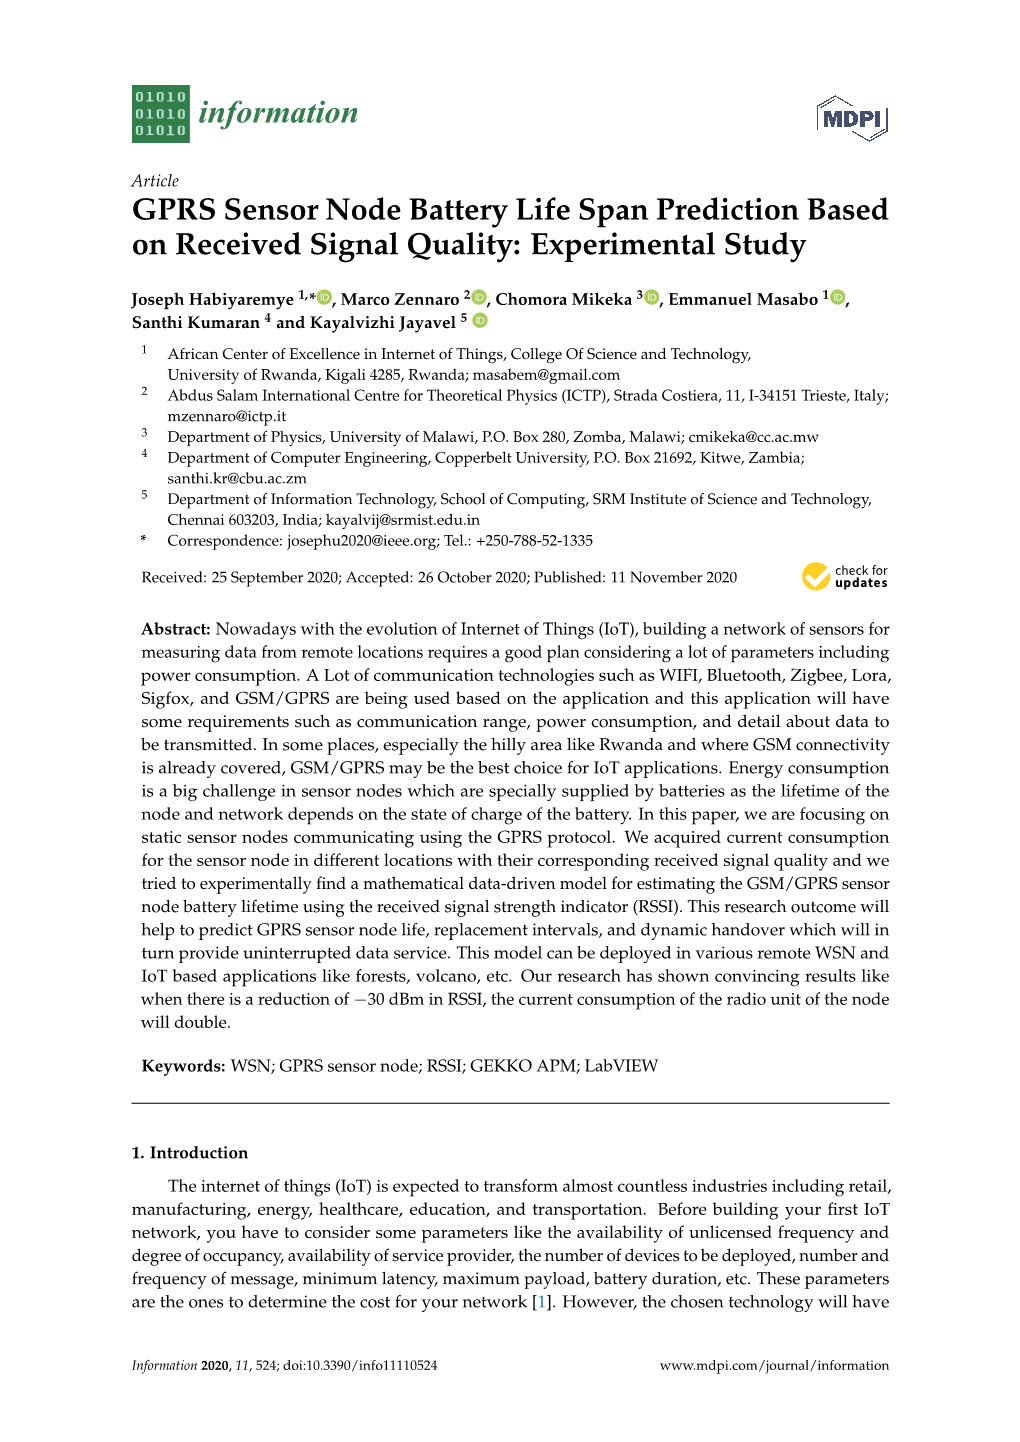 GPRS Sensor Node Battery Life Span Prediction Based on Received Signal Quality: Experimental Study